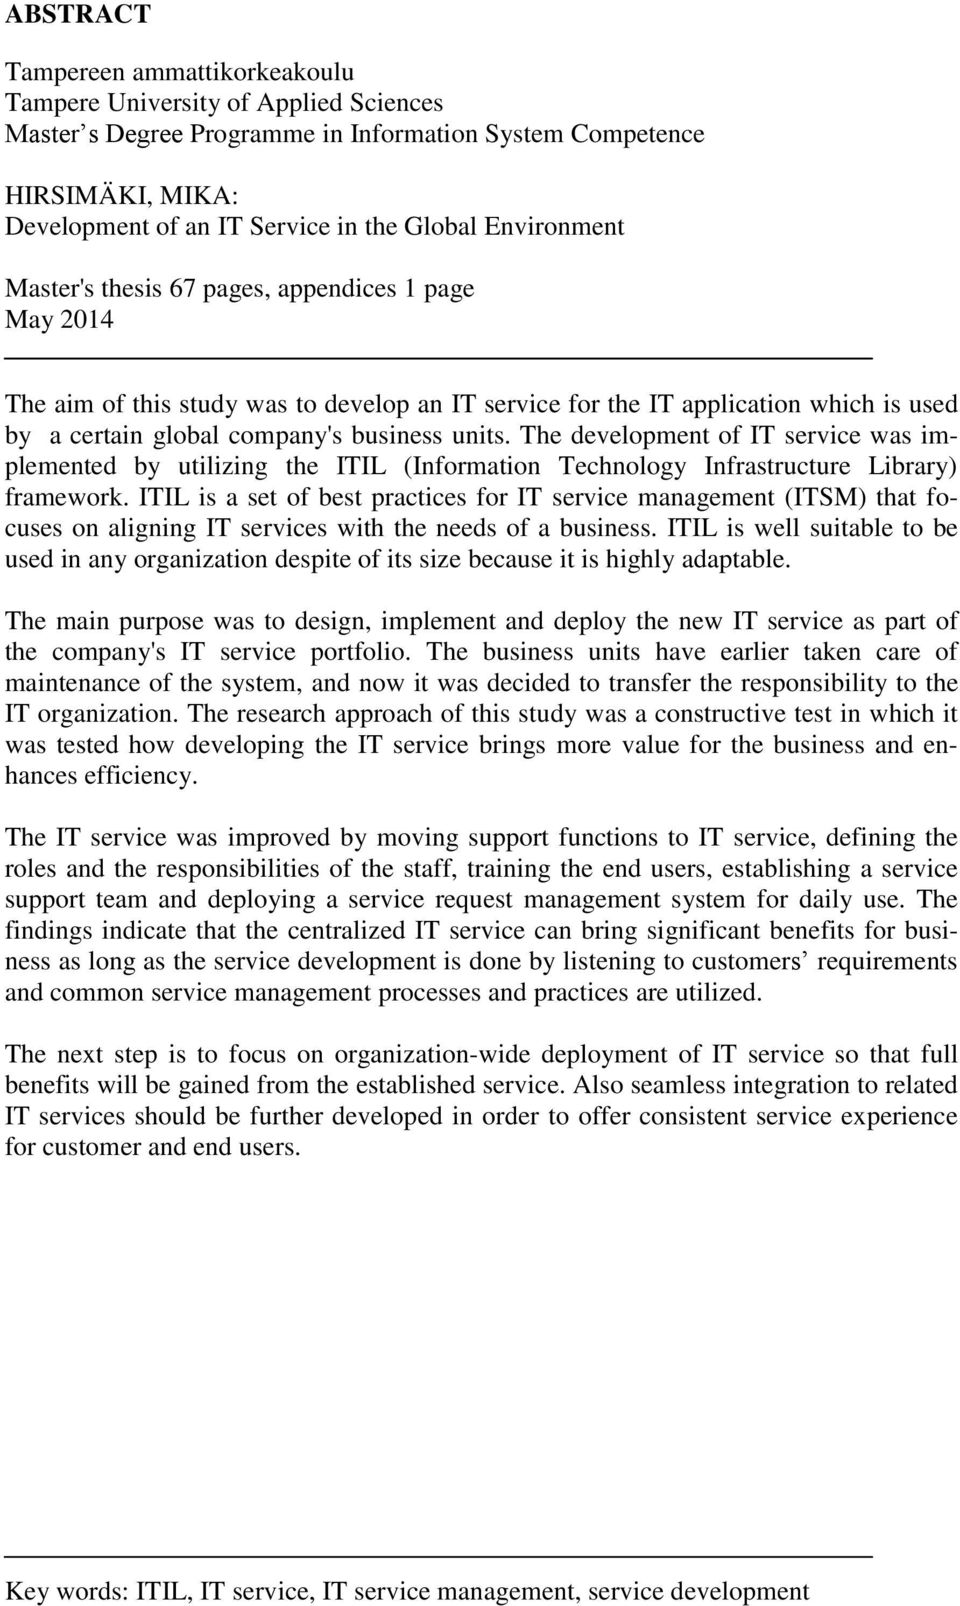 The development of IT service was implemented by utilizing the ITIL (Information Technology Infrastructure Library) framework.